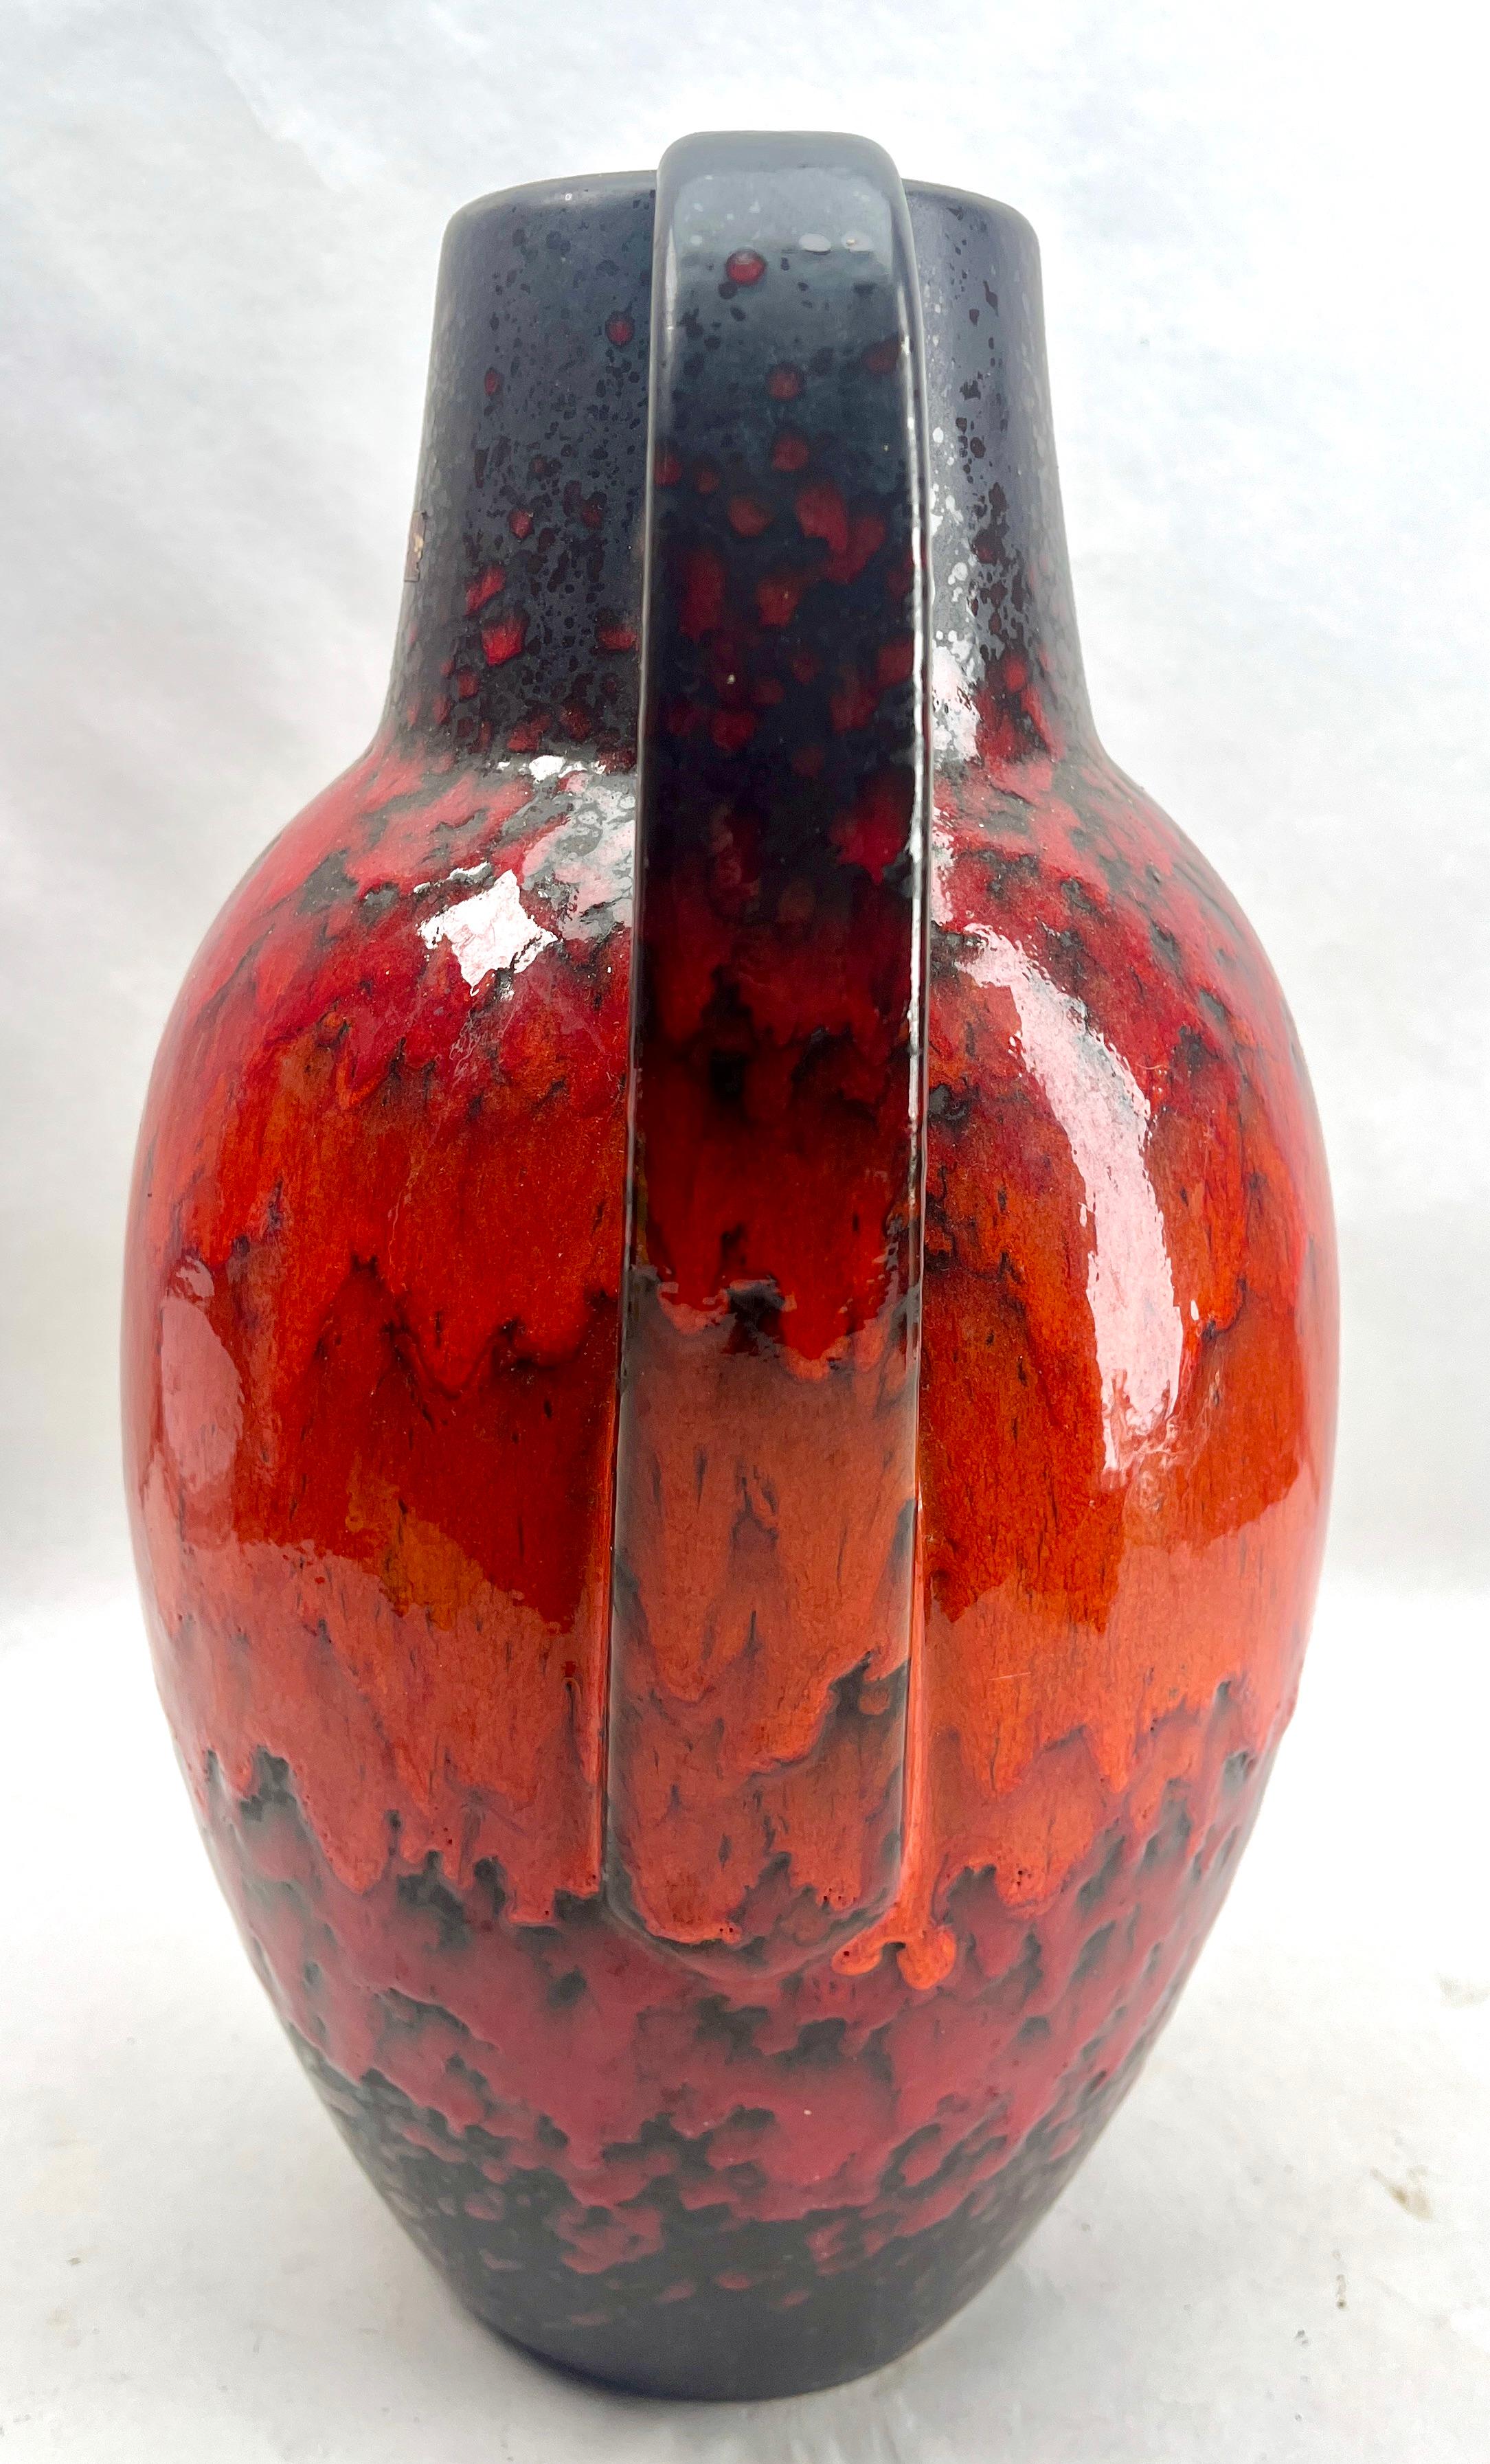 Fat Lava Floor Vase with Red Drip-Glaze 'Scheurich 279-38, W-Germany' 1960s For Sale 4